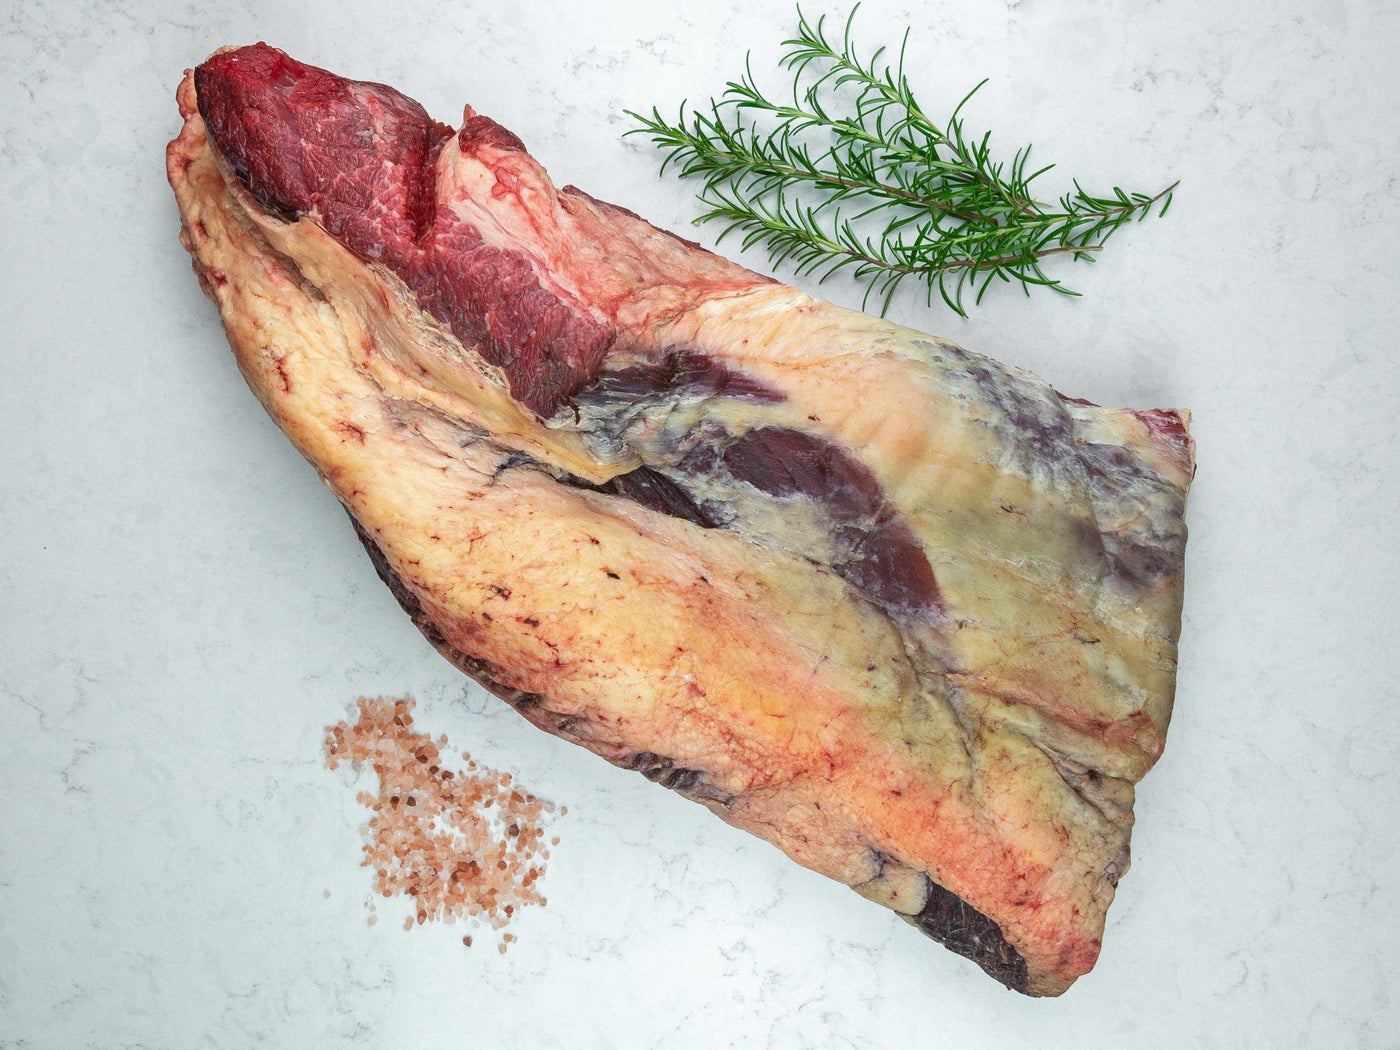 Grass Fed, Dry-Aged Brisket - Beef - Thomas Joseph Butchery - Ethical Dry-Aged Meat The Best Steak UK Thomas Joseph Butchery